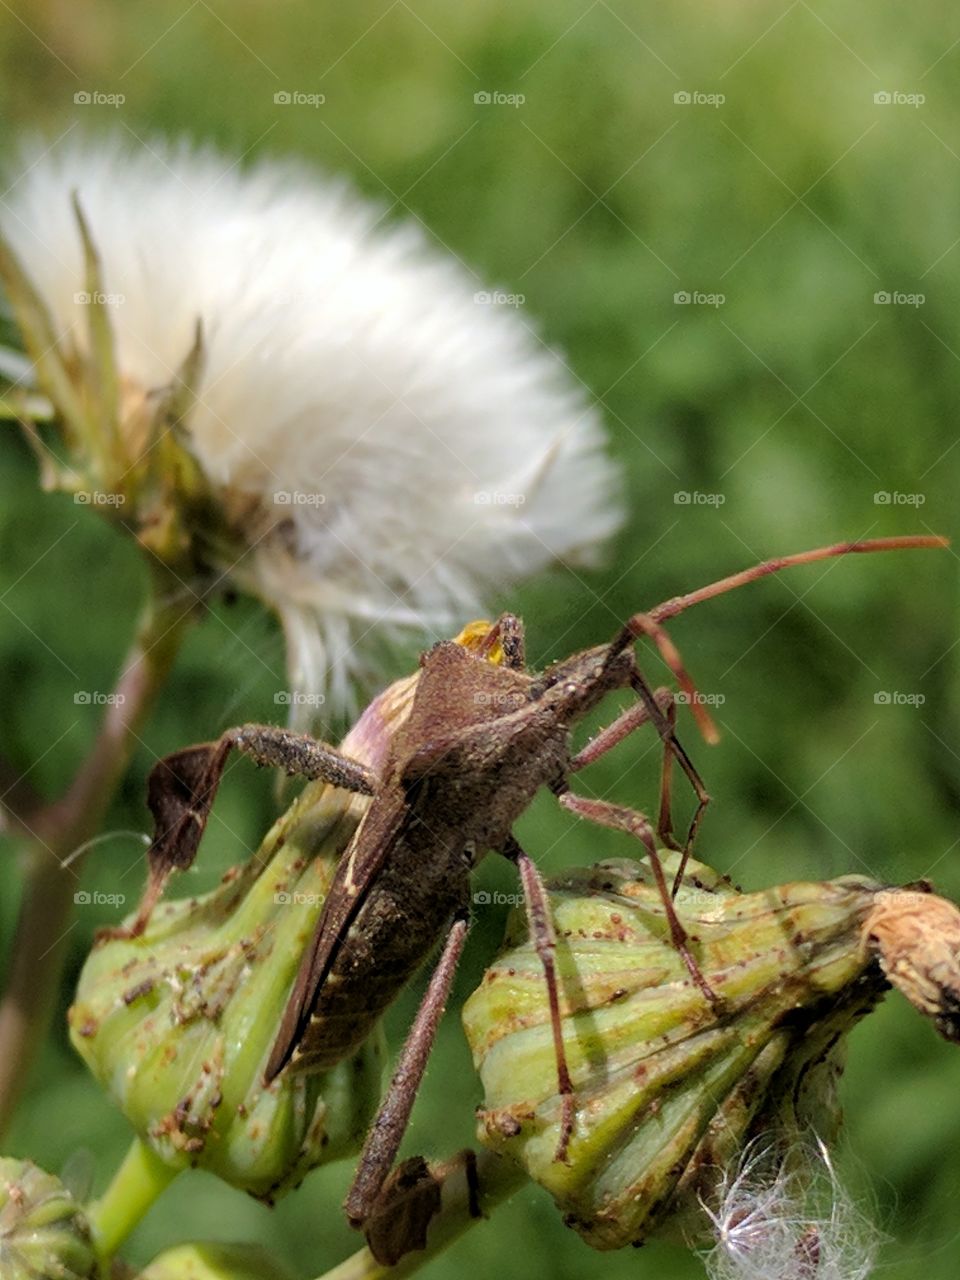 cool close up of a leaf footed bug